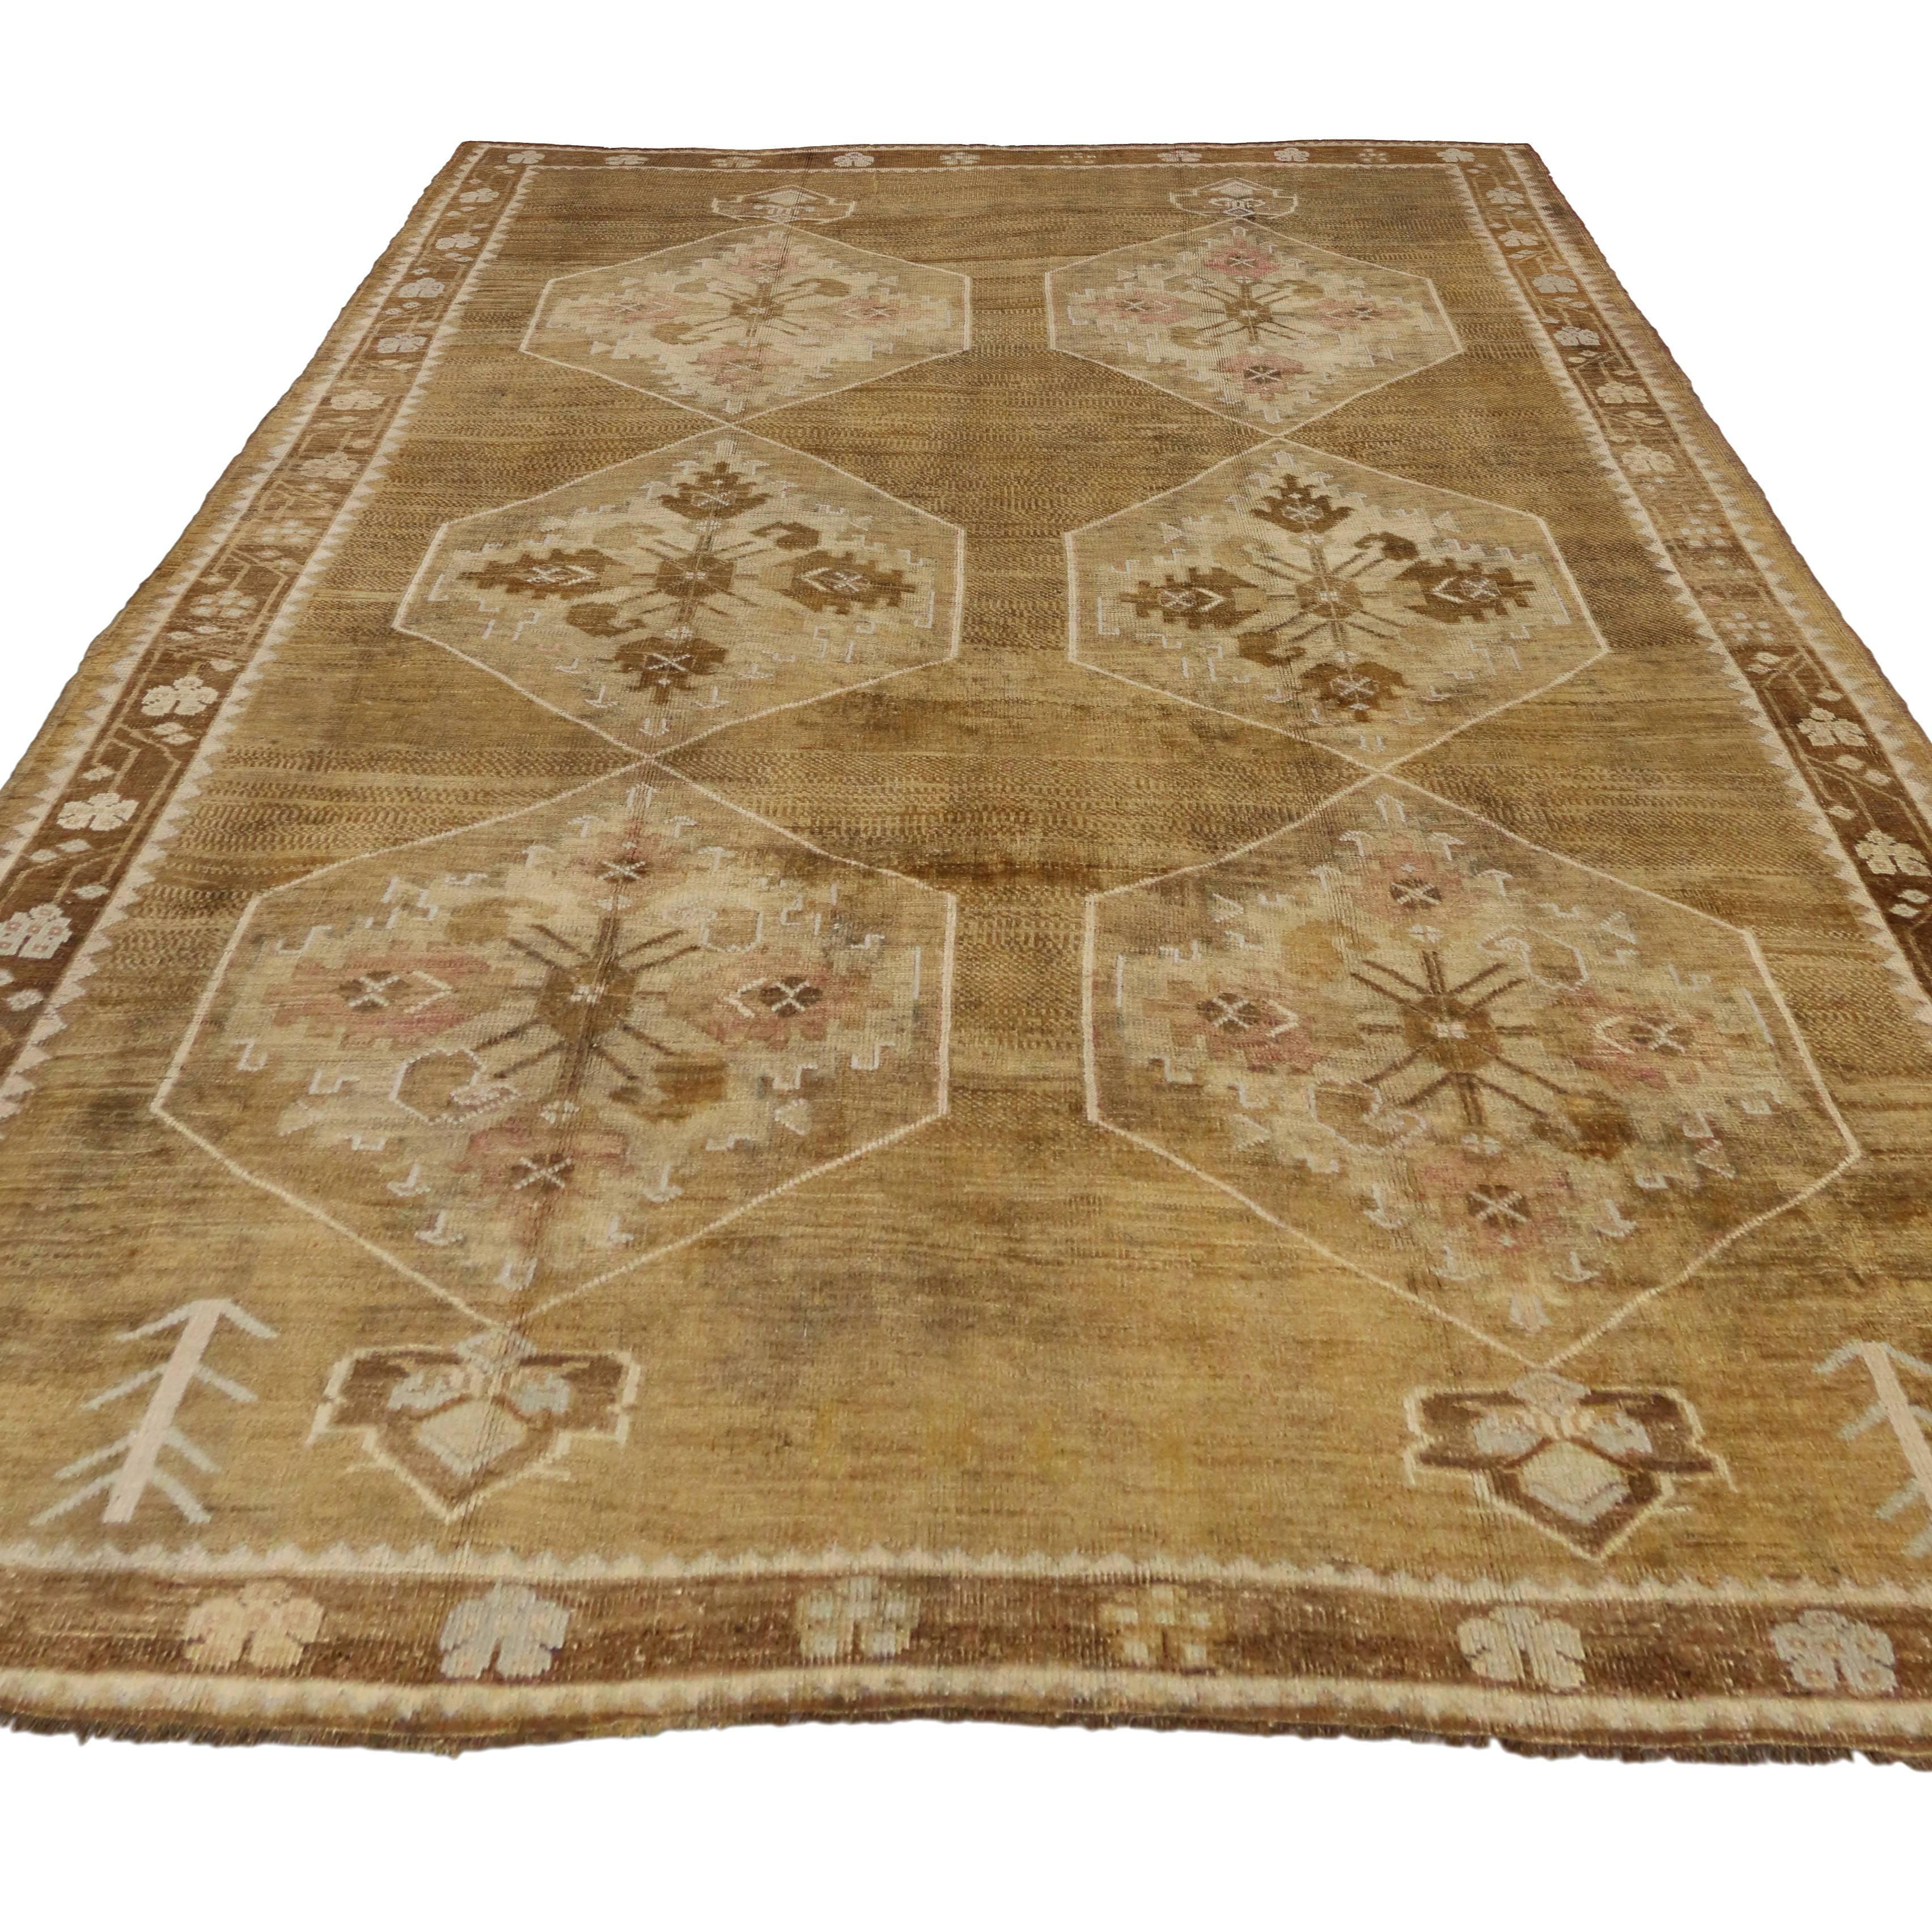 Hand-Knotted Vintage Turkish Kars Oushak Rug with Modern Design and Neutral Colors